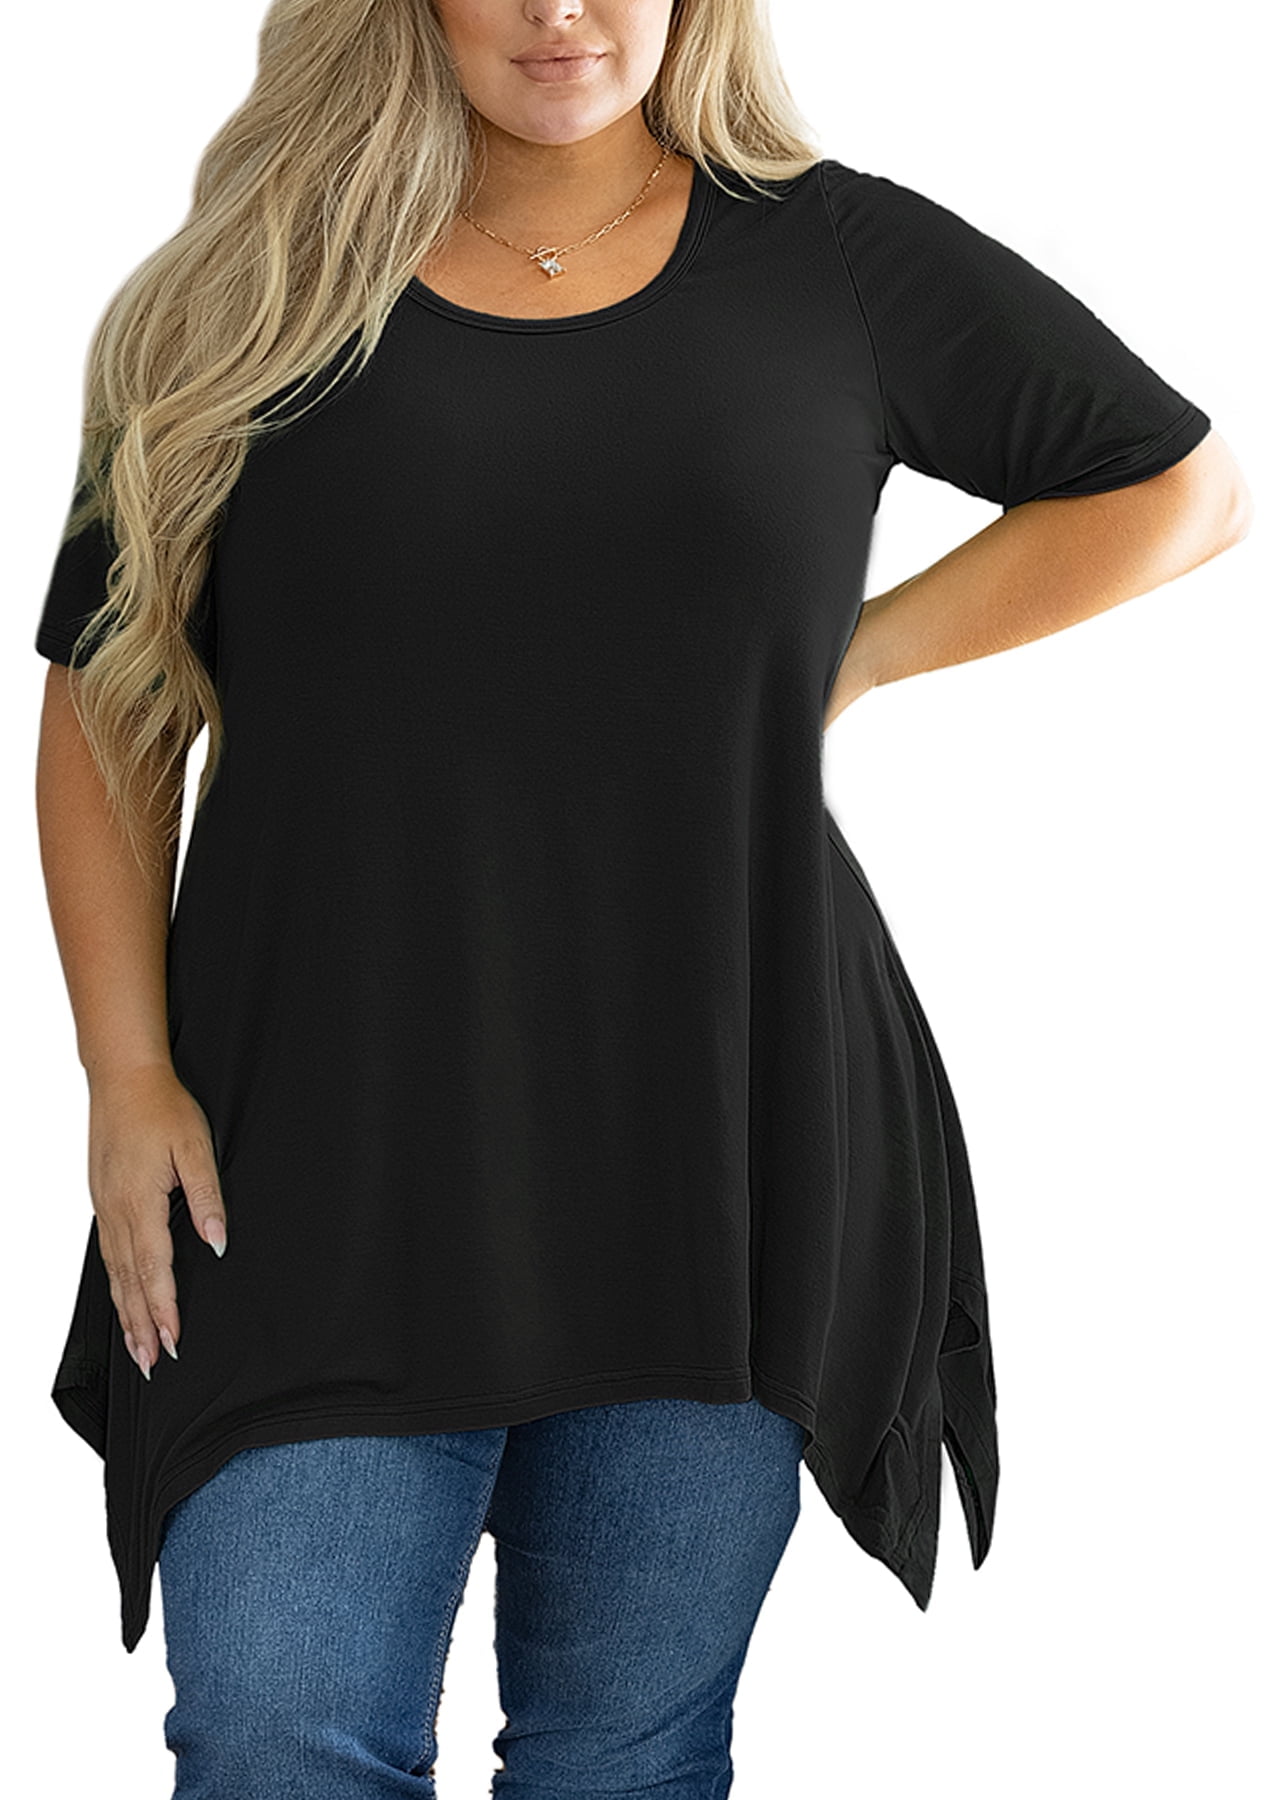 TIYOMI Plus Size Tops For Women 3X Short Sleeve T-Shirts V-Neck Pink Star  Blouses Casual Loose Fit Tunics For Summer 3XL 22W 24W 